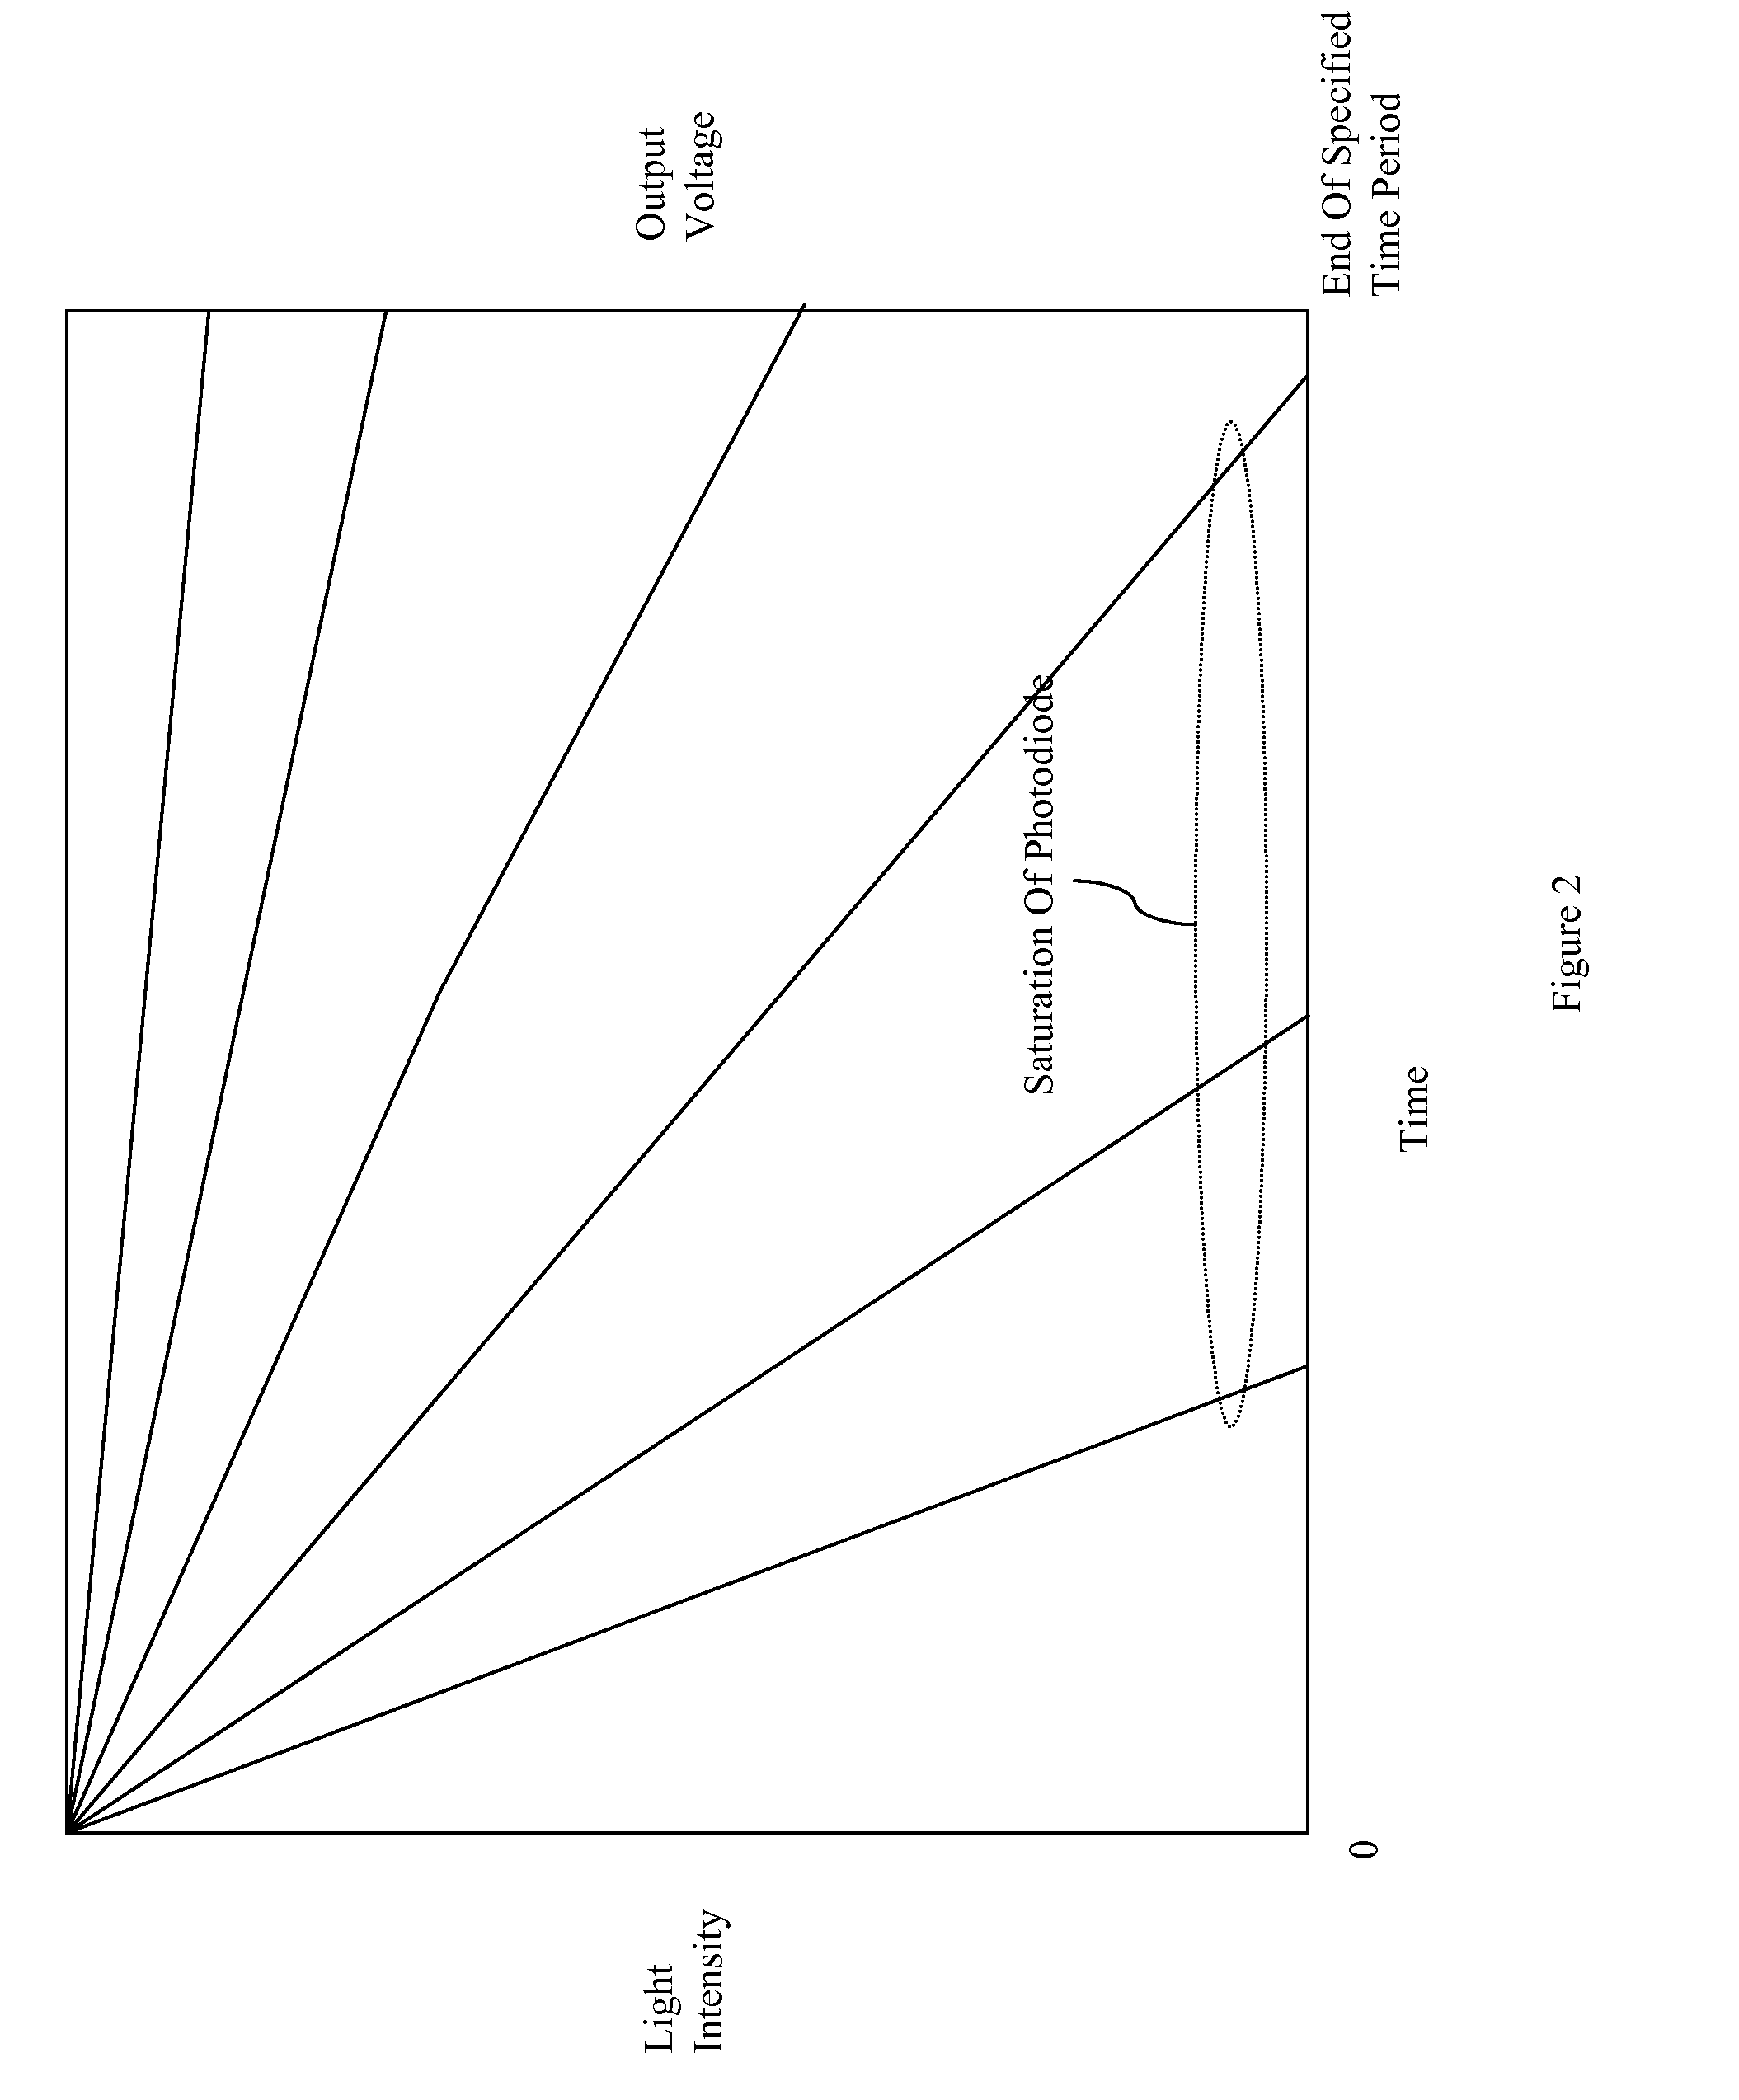 Wide dynamic range image sensor utilizing switch current source at pre-determined switch voltage per pixel